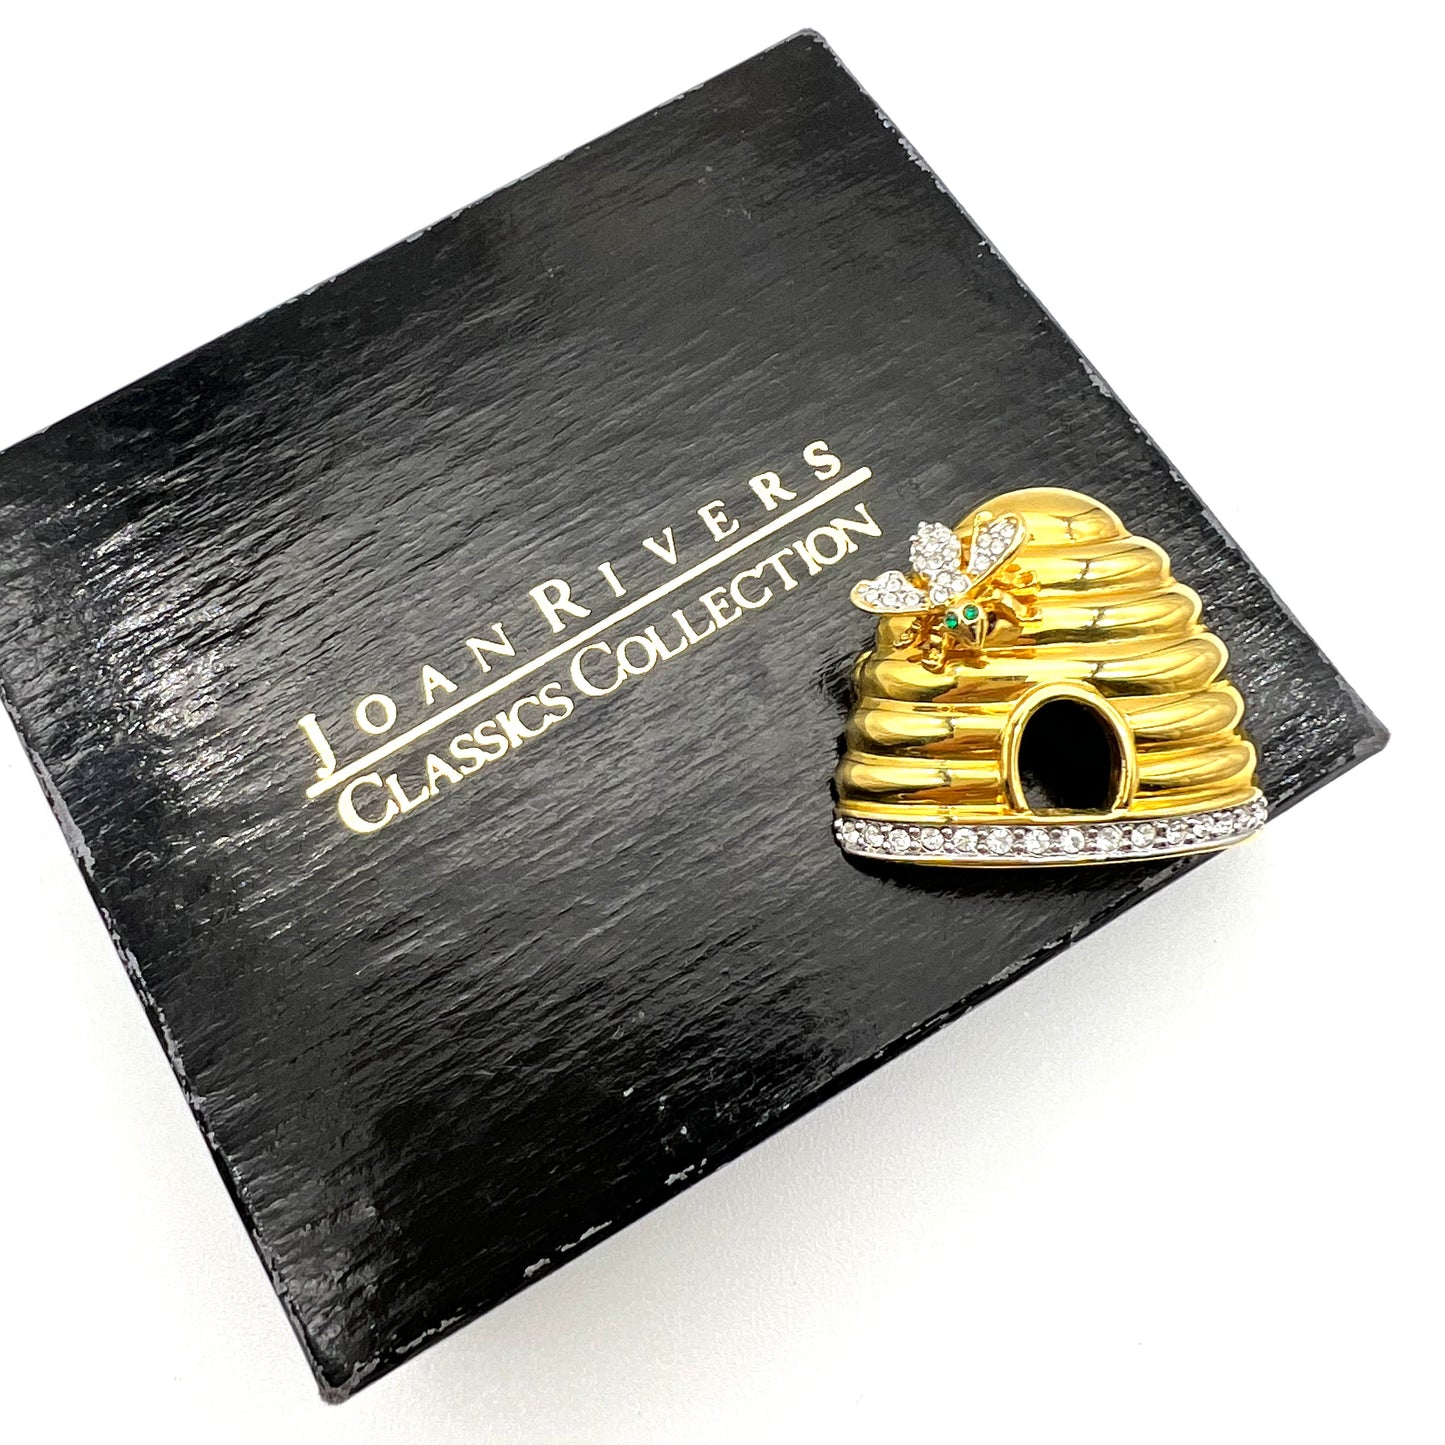 Joan Rivers Bee on Beehive Gold Plated Brooch in Joan Rivers Box